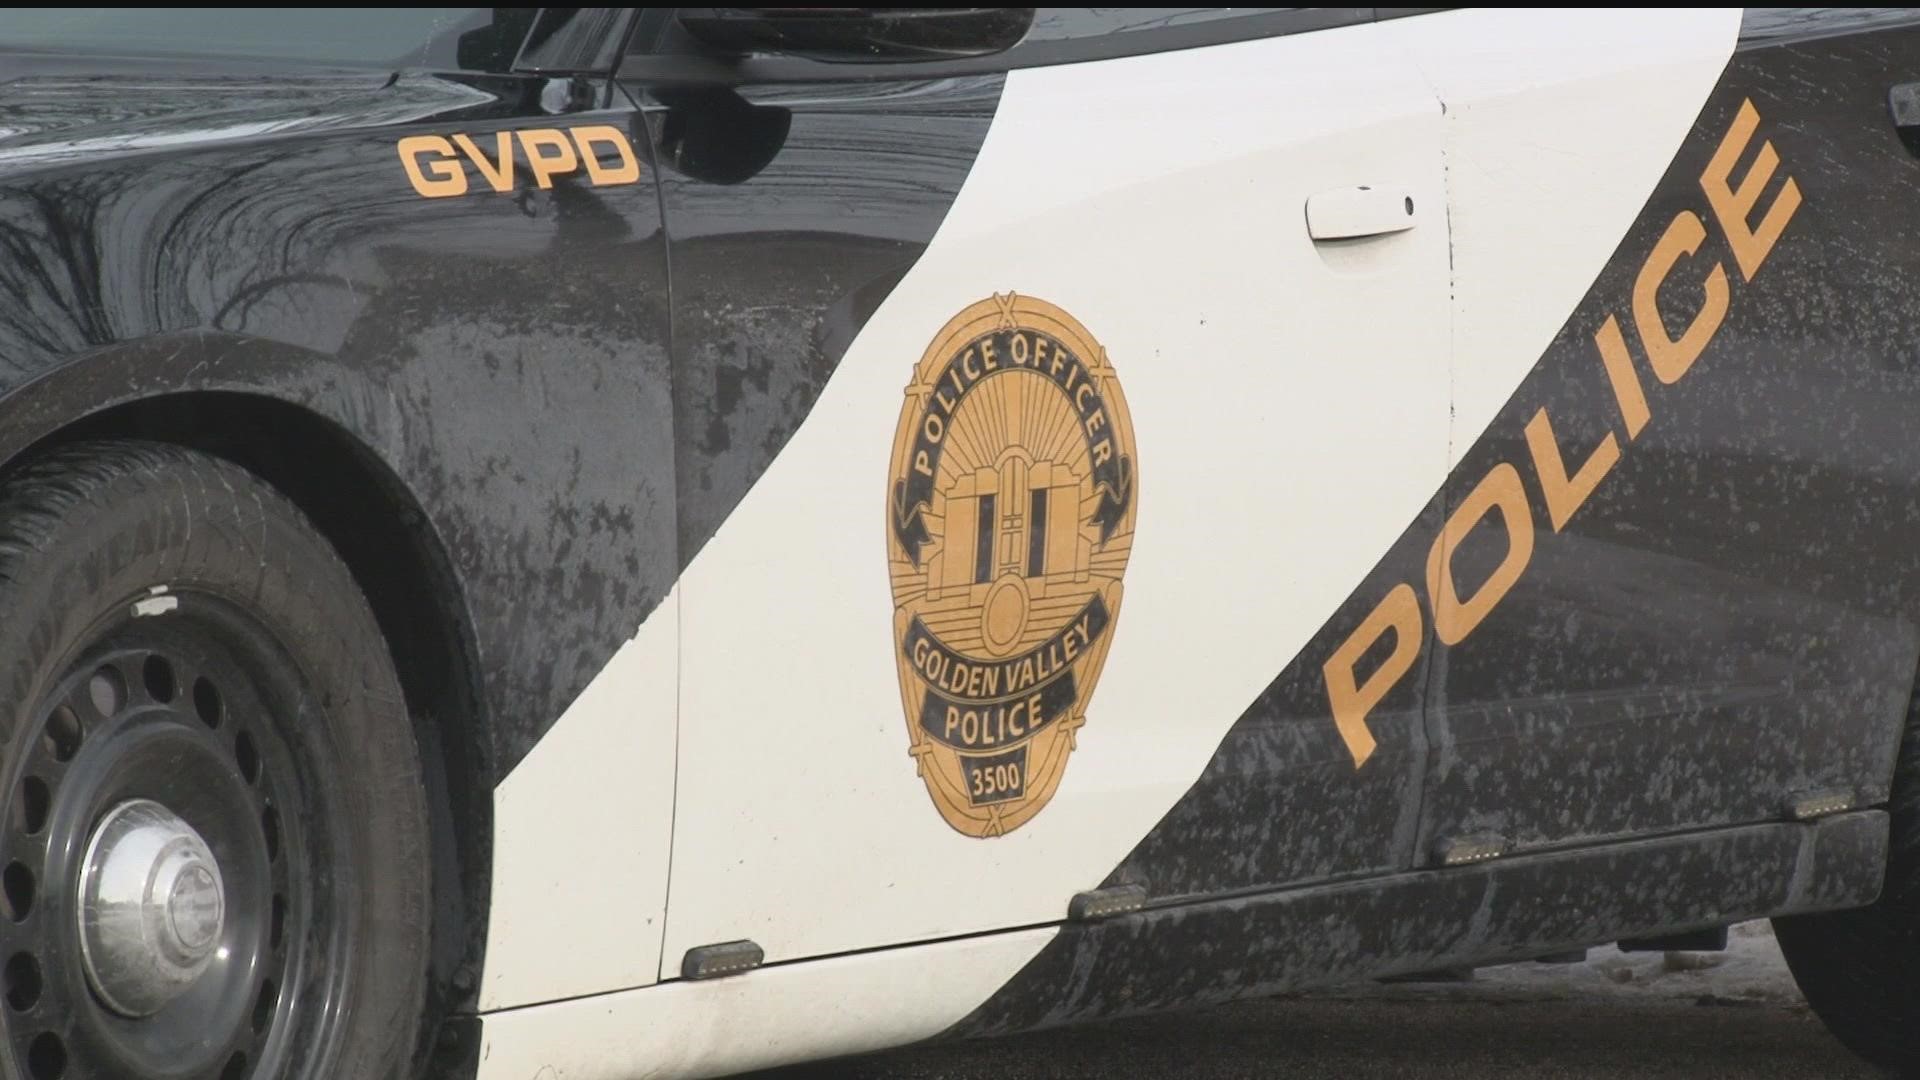 The City of Golden Valley hired a law firm in March 2022 to conduct an independent investigation into alleged police department misconduct.